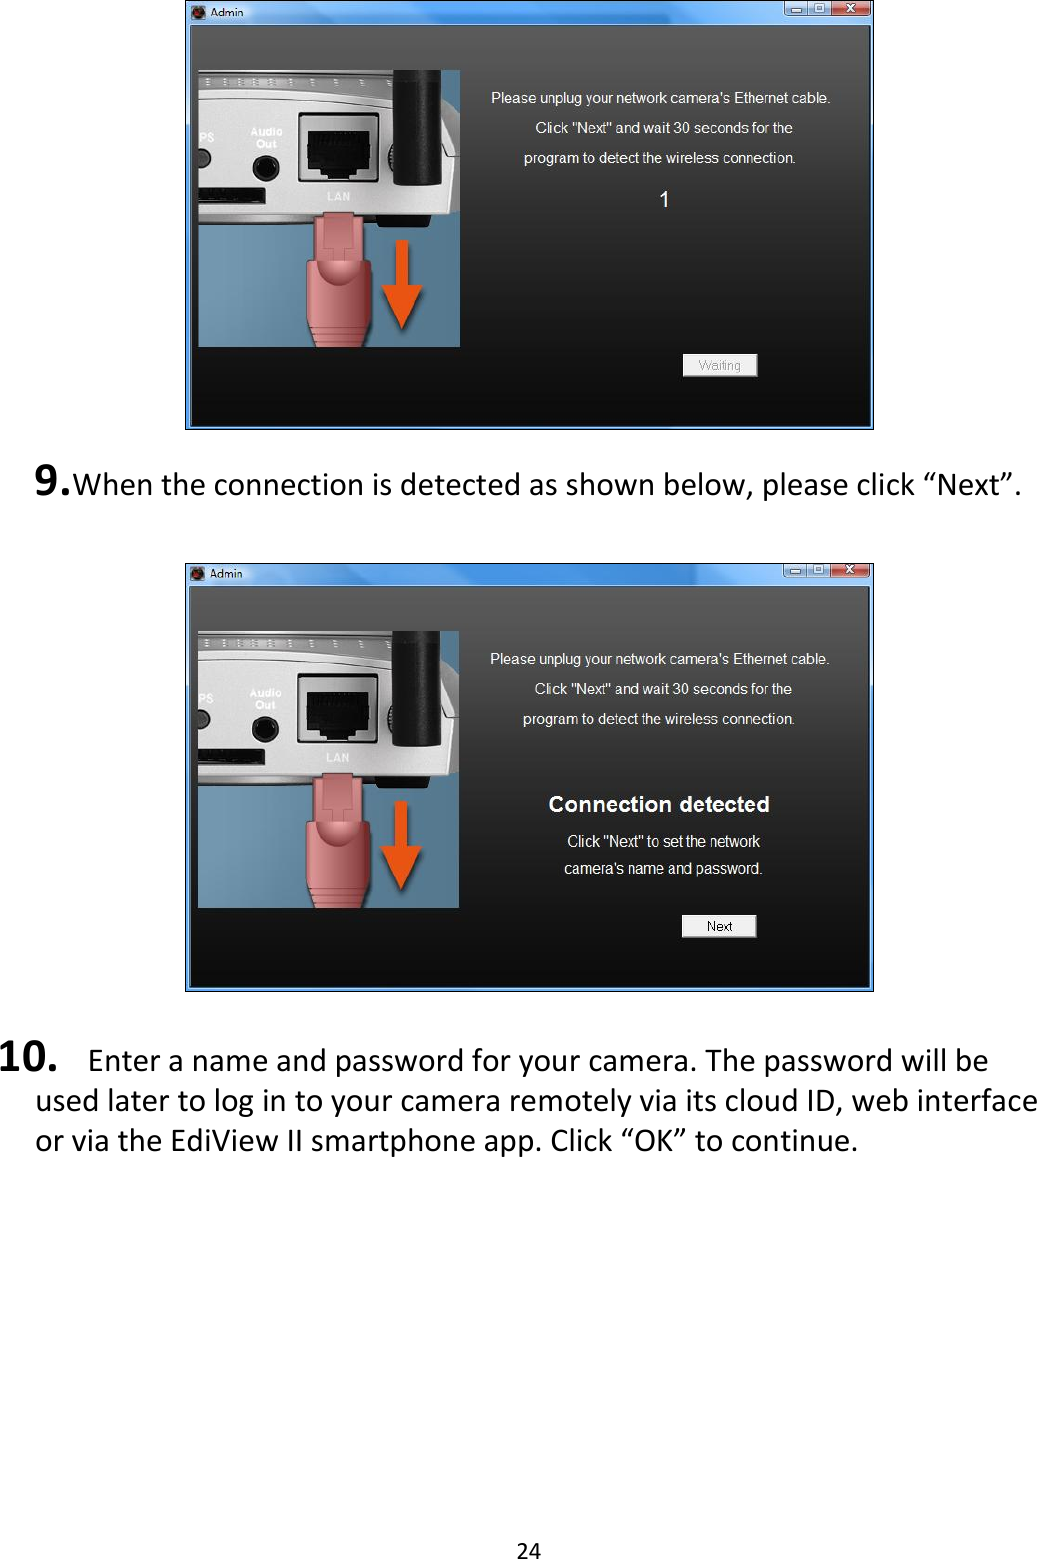 24   9. When the connection is detected as shown below, please click “Next”.    10.   Enter a name and password for your camera. The password will be used later to log in to your camera remotely via its cloud ID, web interface or via the EdiView II smartphone app. Click “OK” to continue.  